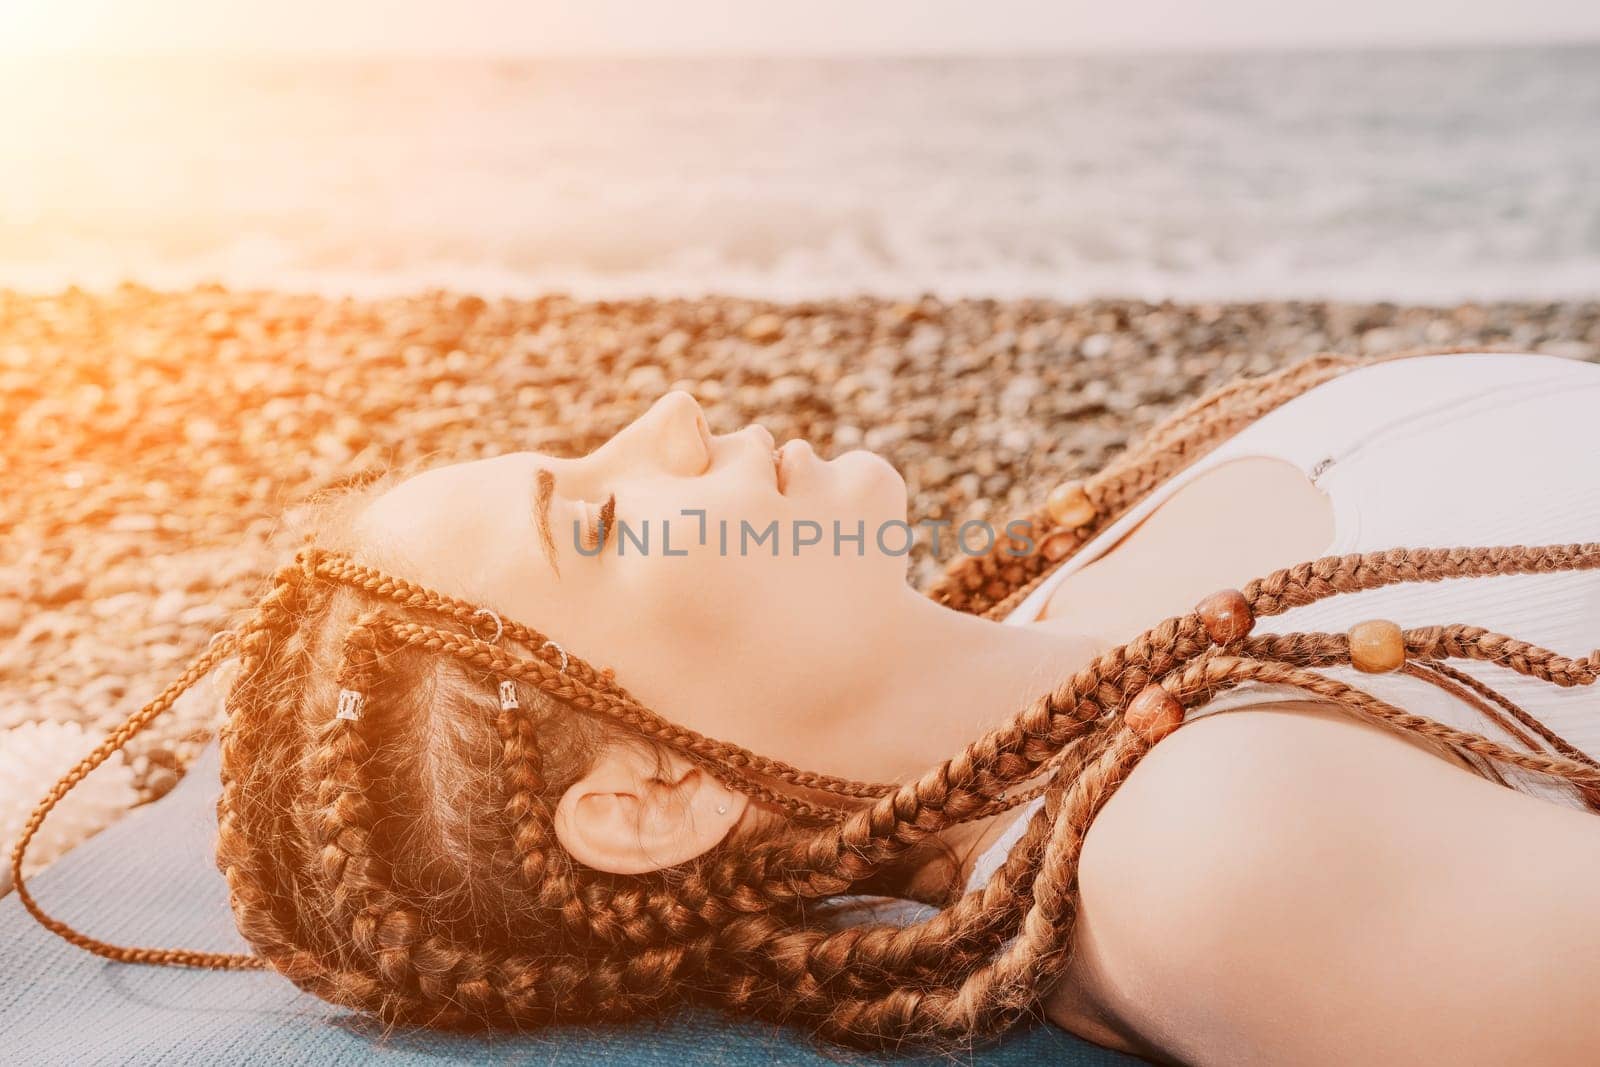 Woman sea yoga. Well looking middle aged woman with braids dreadlocks in white leggings and tops doing stretching pilates on yoga mat near sea. Female fitness yoga routine concept. Healthy lifestyle. by panophotograph